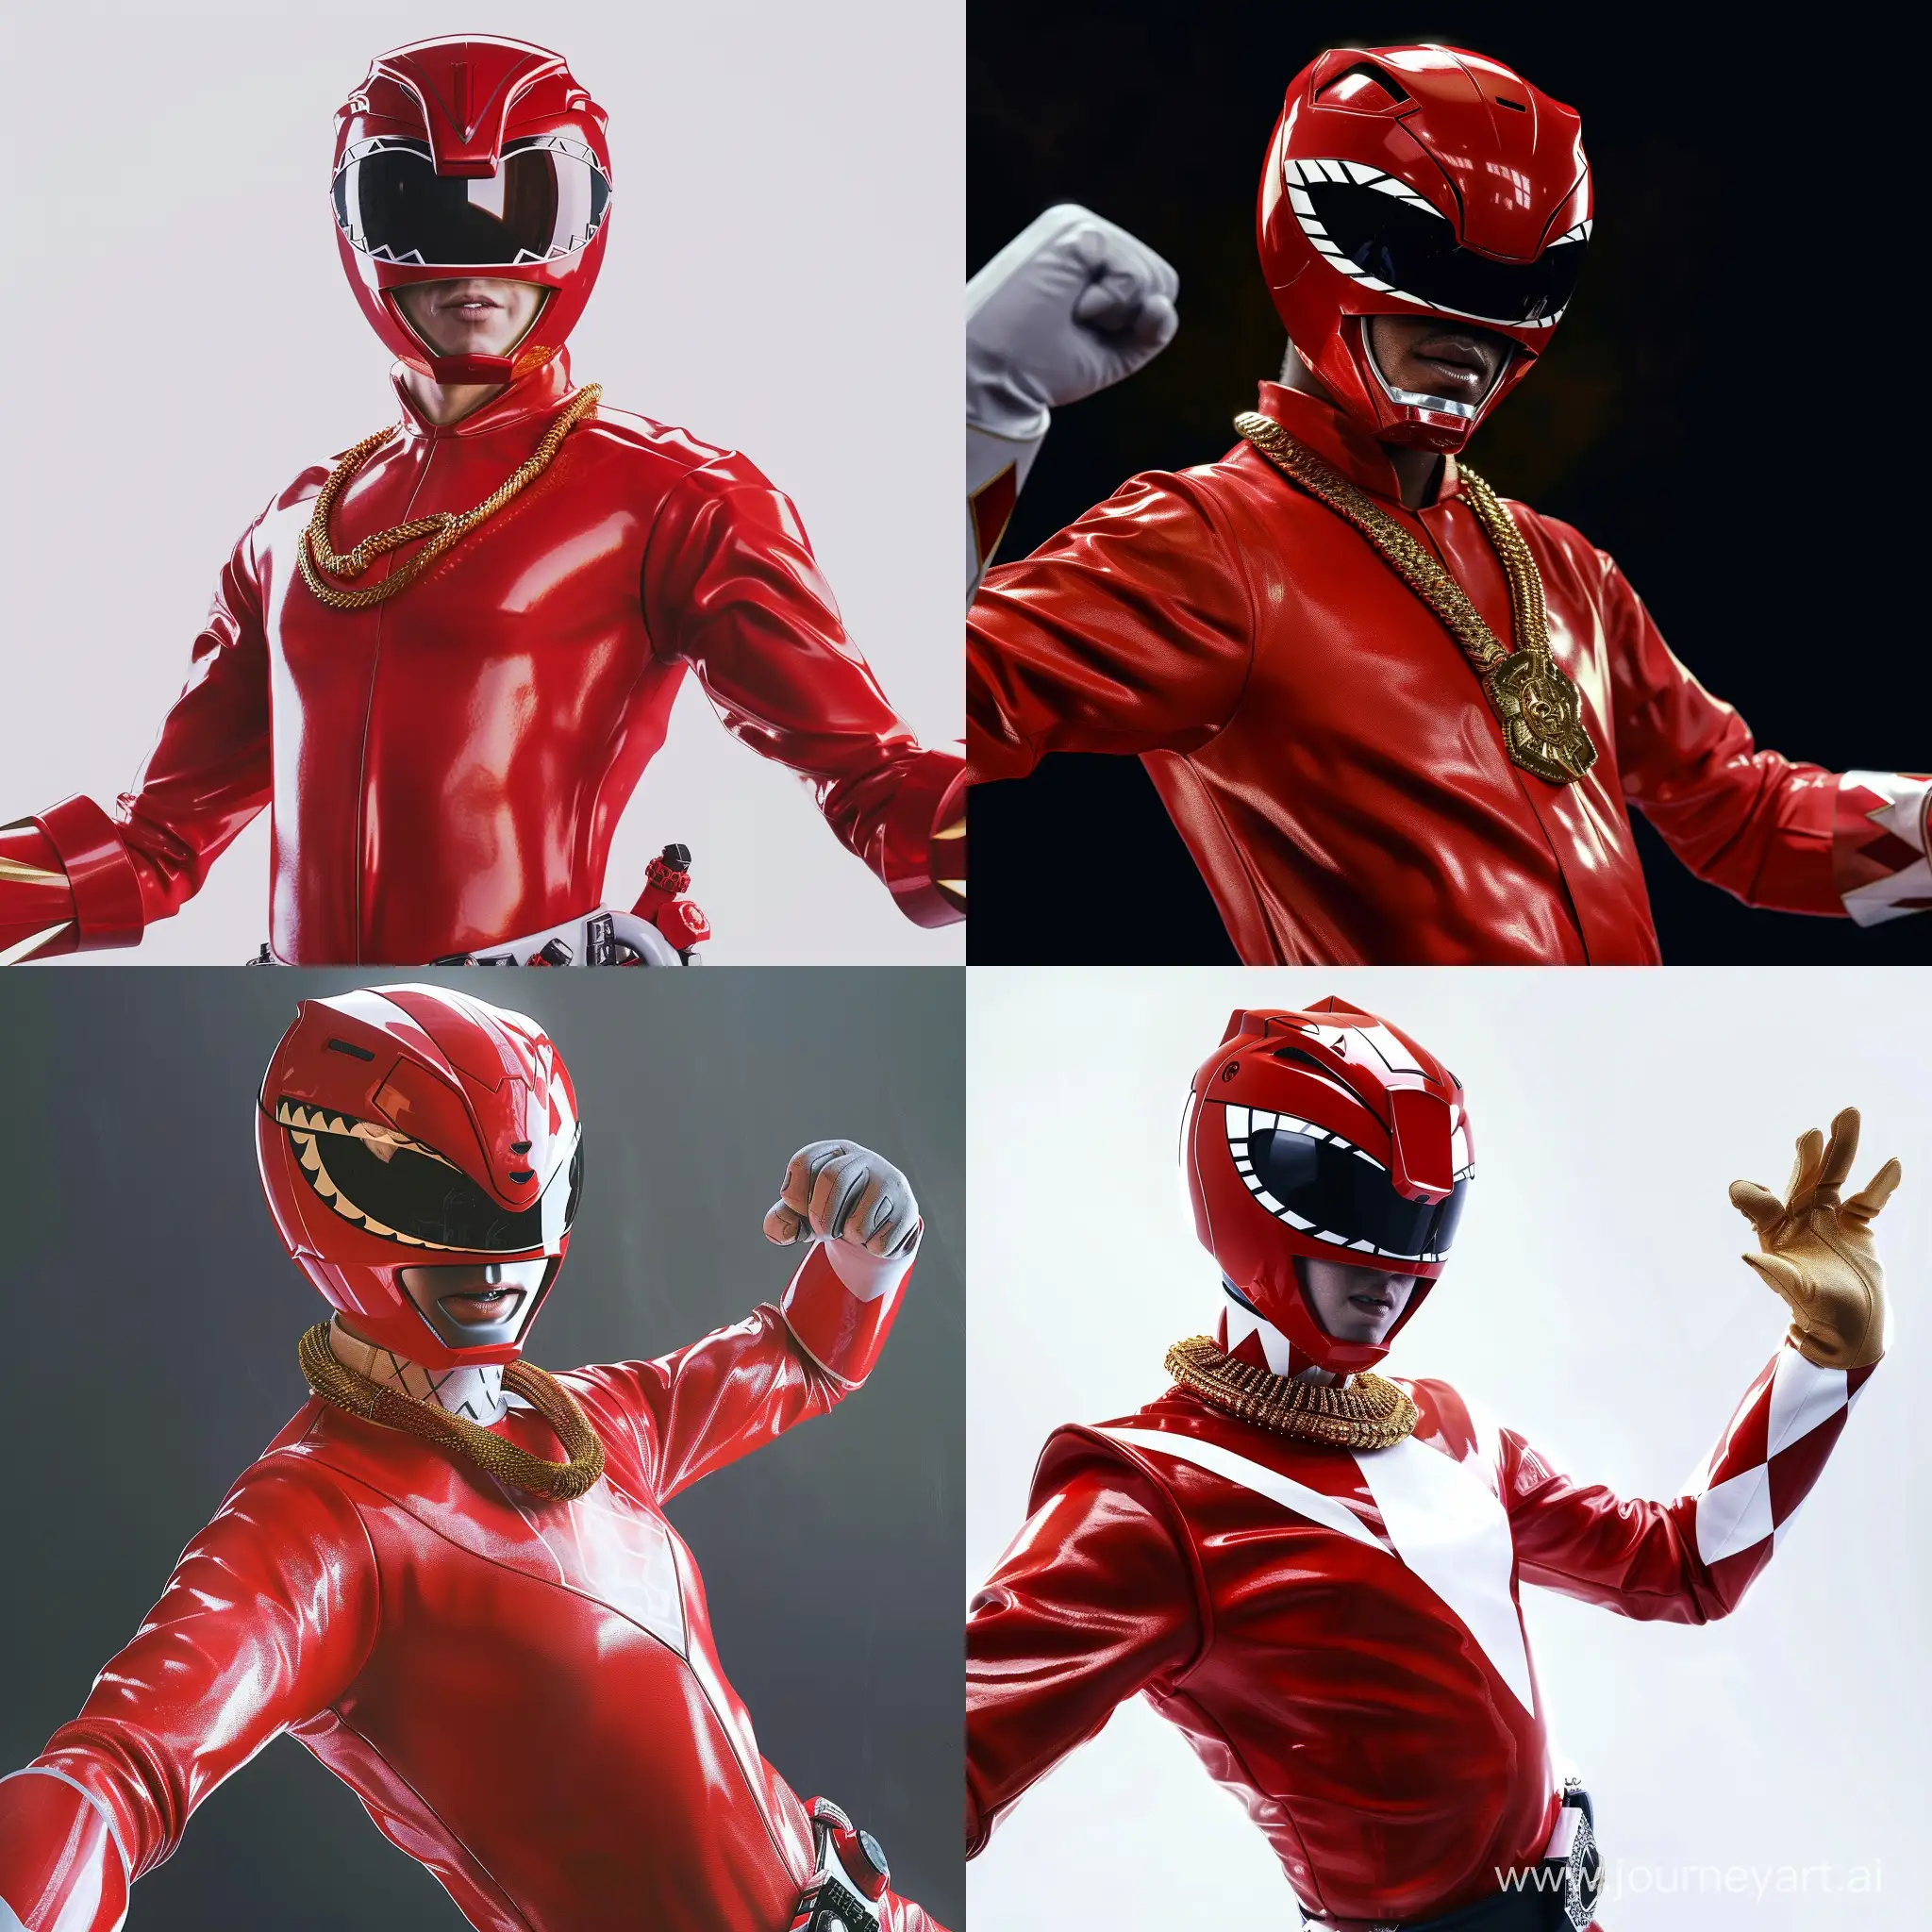 Mighty-Red-Power-Ranger-with-Panther-Necklace-in-Dynamic-Pose